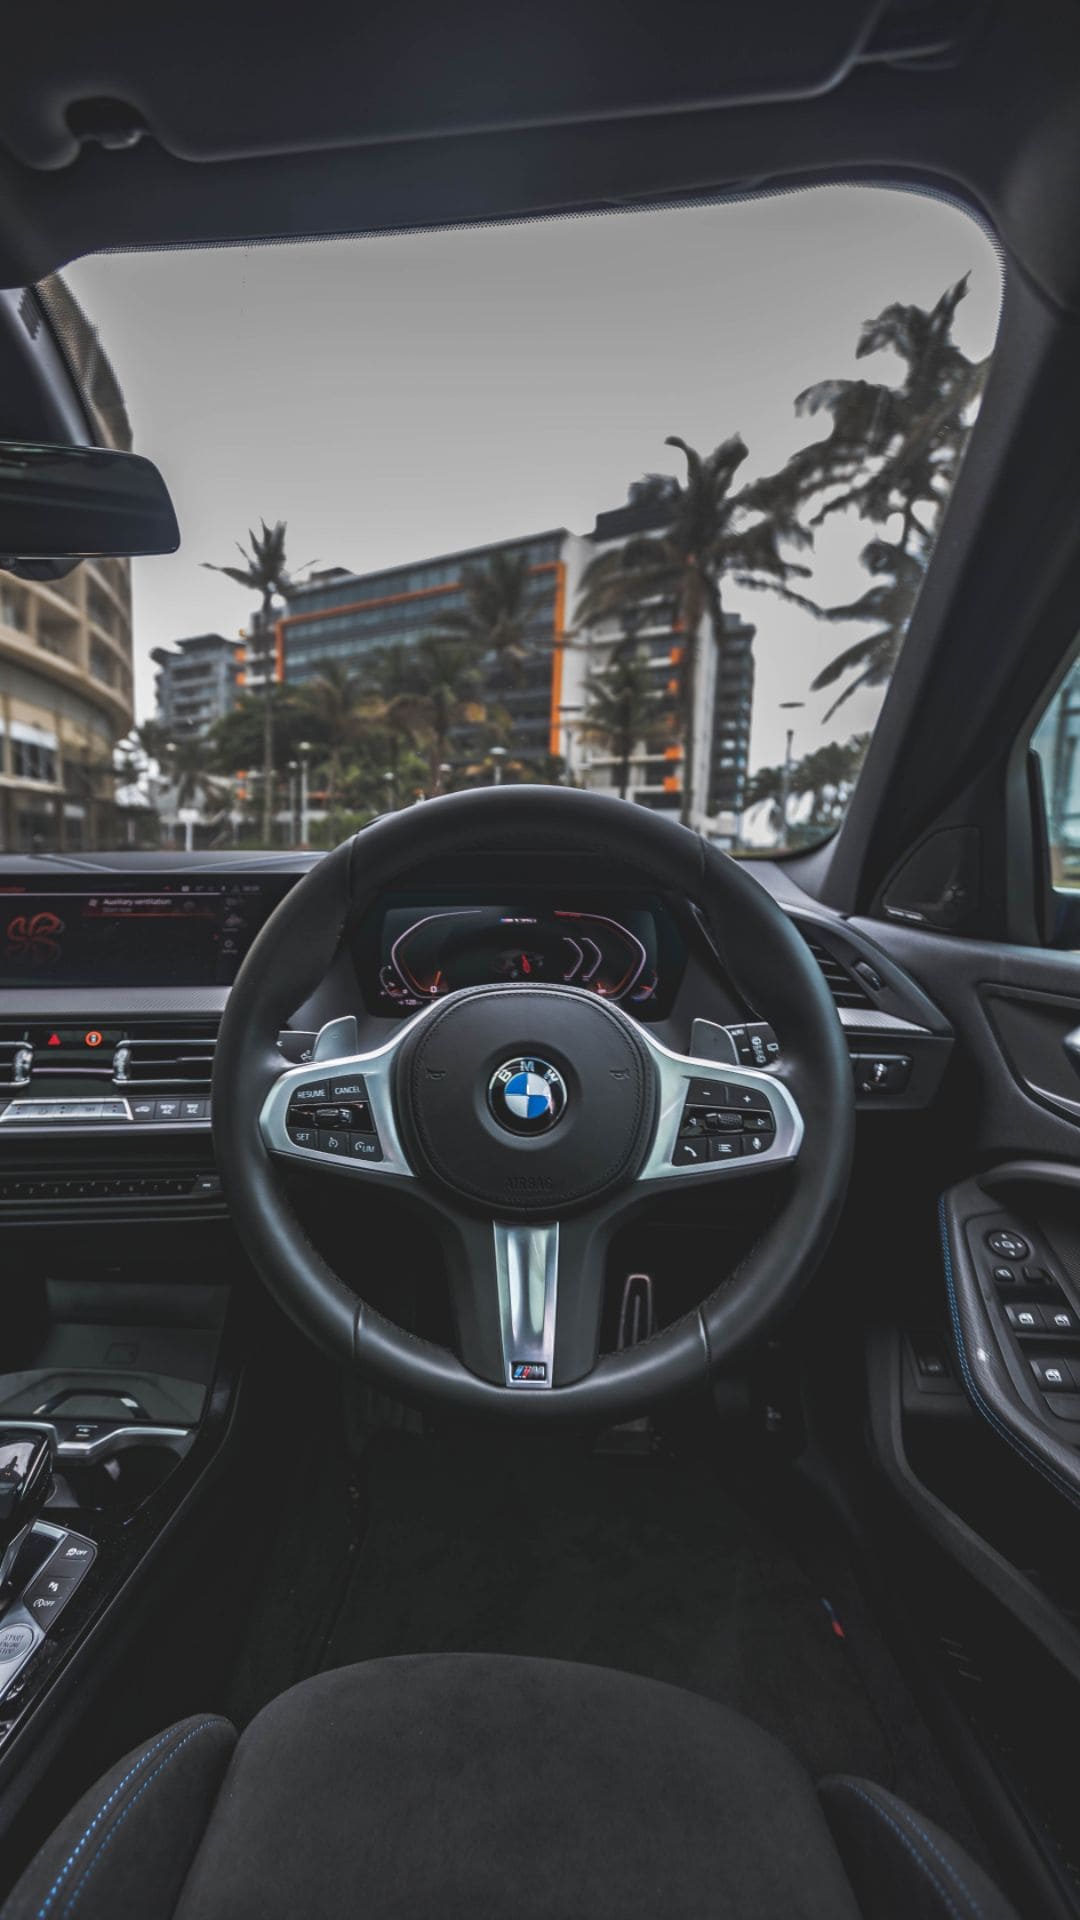 IPhone wallpaper of the interior of a BMW - BMW